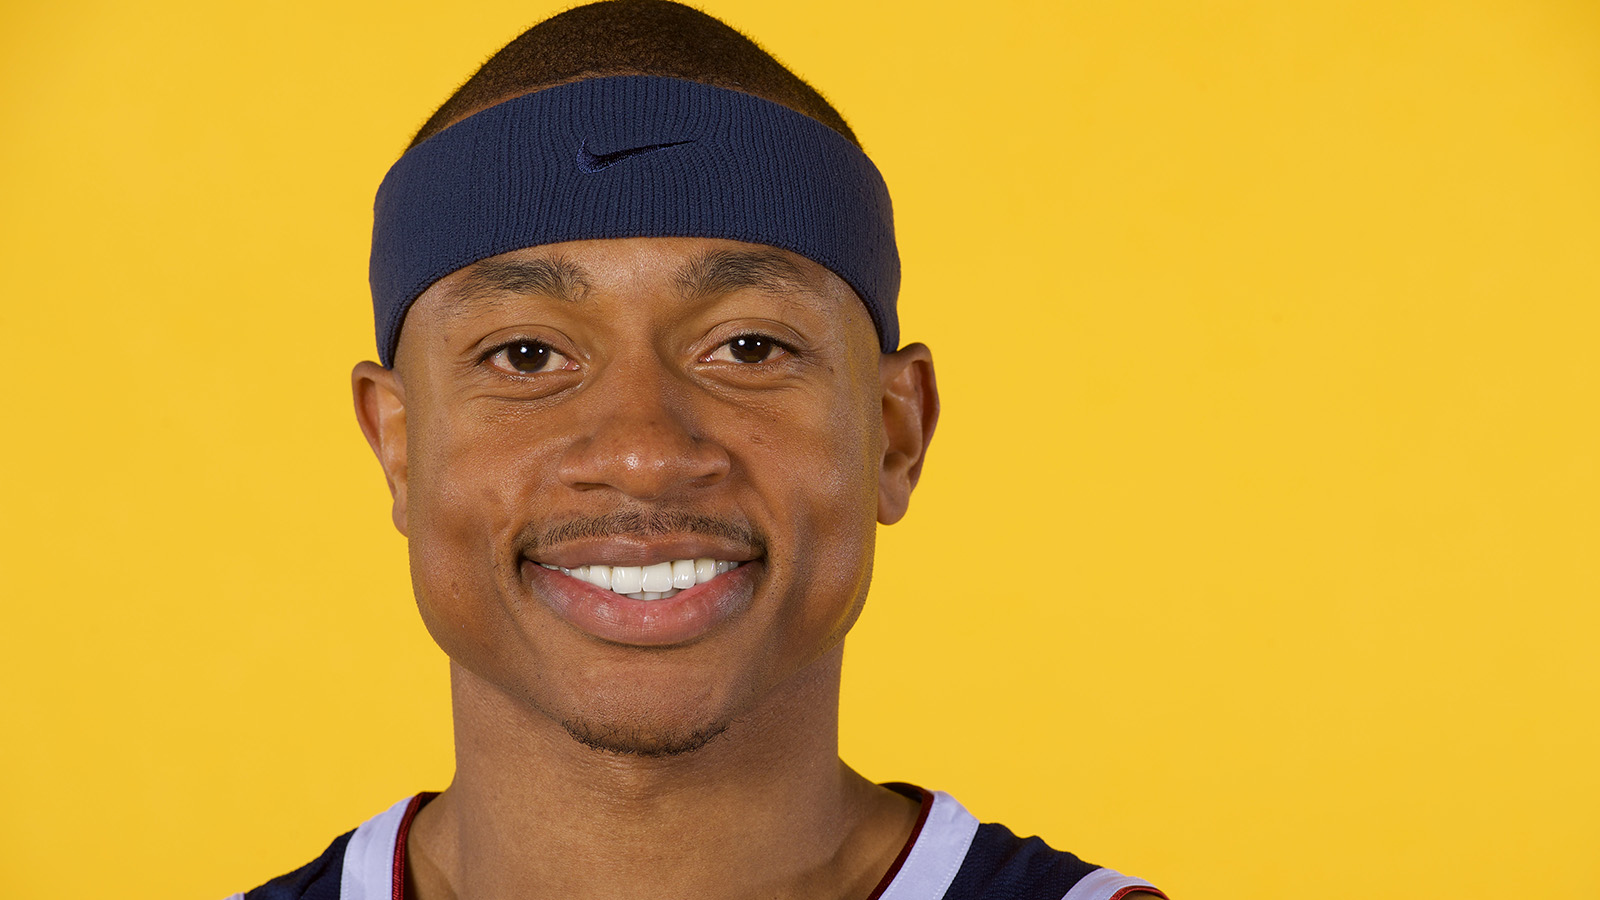 Isaiah Thomas of the Denver Nuggets poses for a portrait during the Denver Nuggets Media Day at the Pepsi Center on Sept. 24, 2018. (Photo by Jamie Schwaberow/Getty Images)